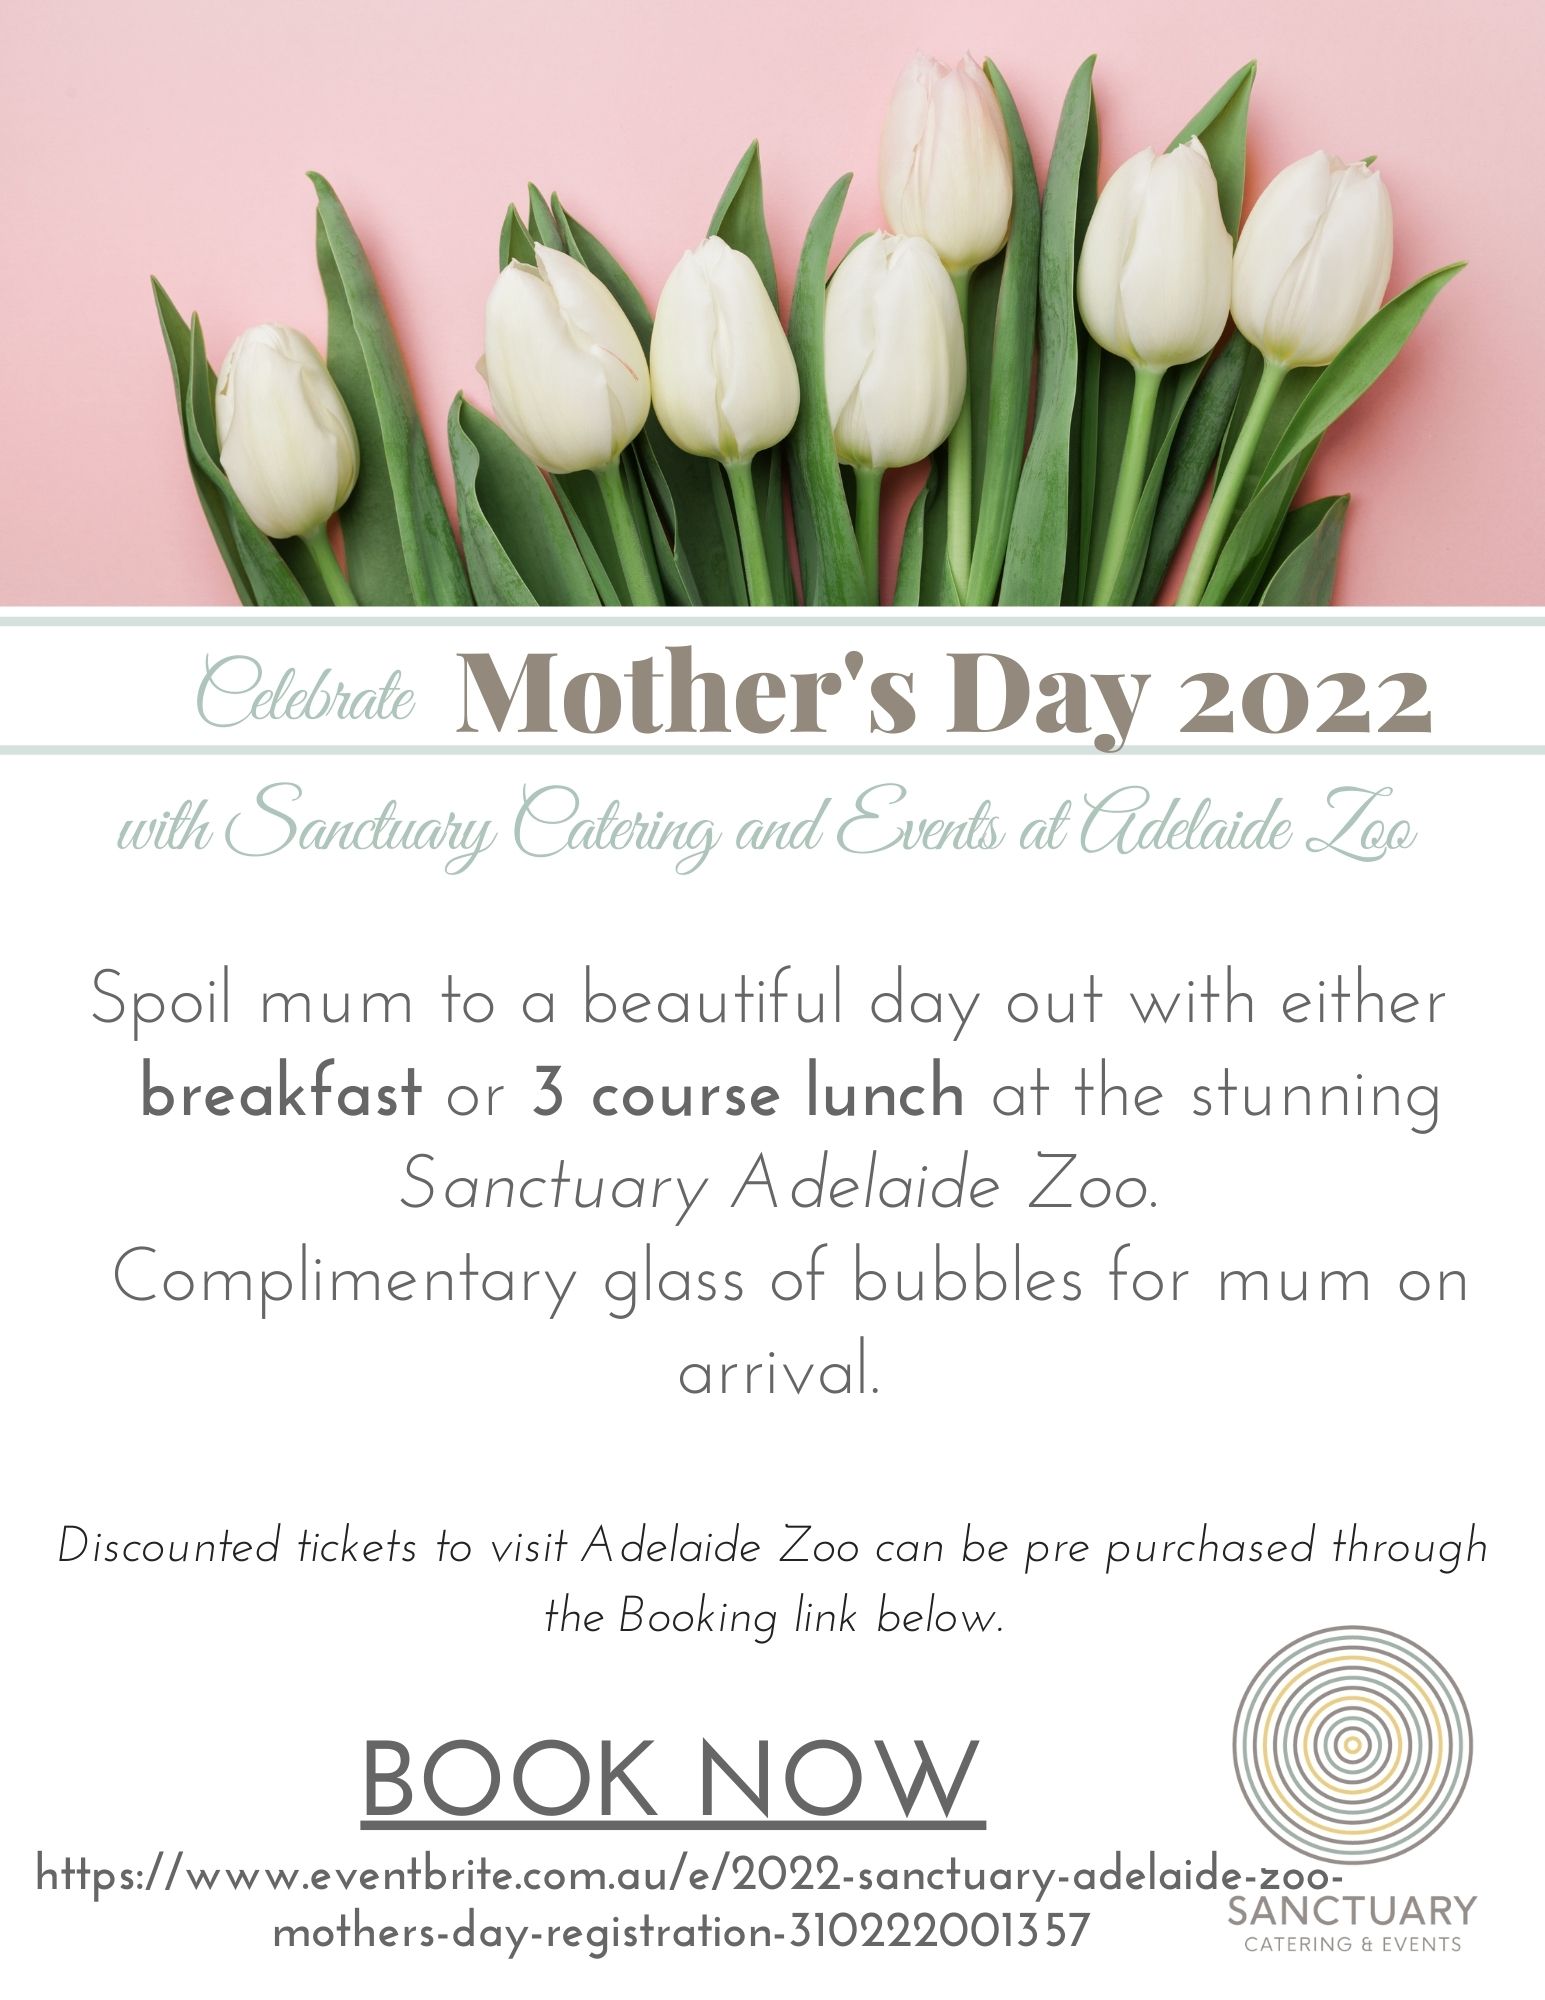 Mothers Day 2022 event & catering special